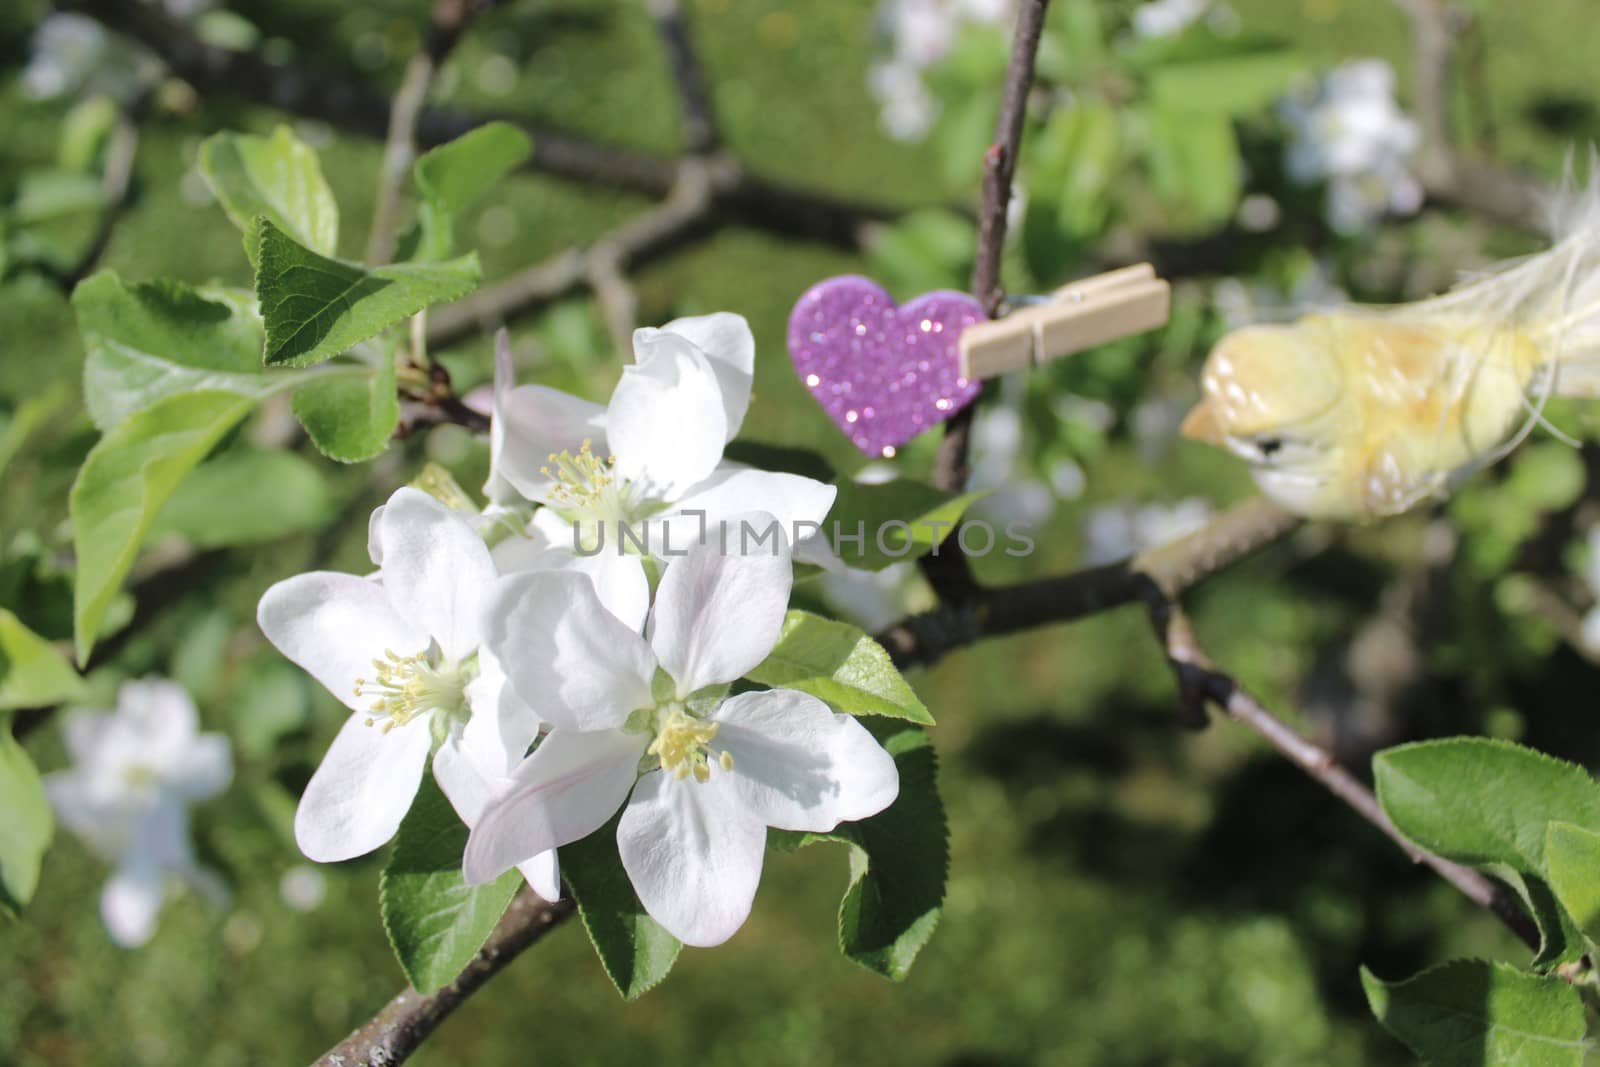 The picture shows an apple tree blossoms and a heart.